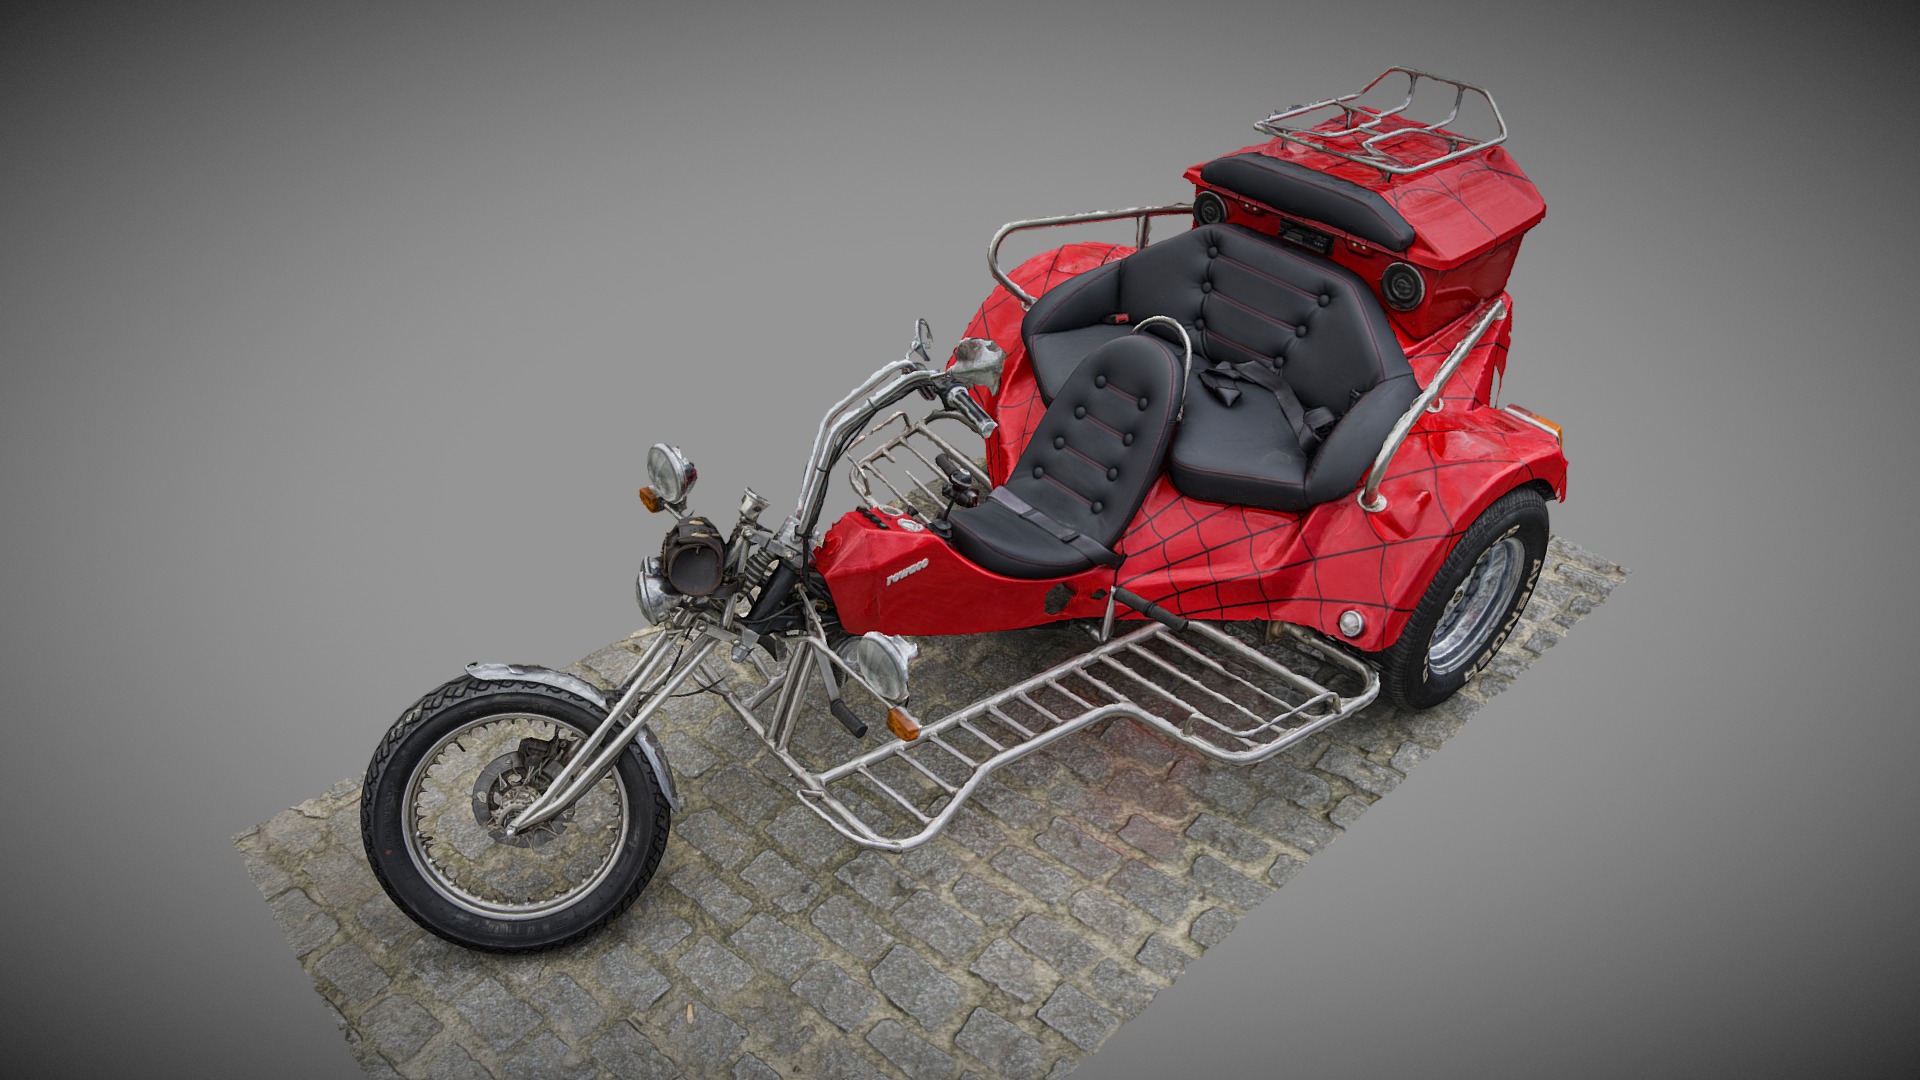 3D model Rewaco Trike HS5 - This is a 3D model of the Rewaco Trike HS5. The 3D model is about a motorcycle with a sidecar.